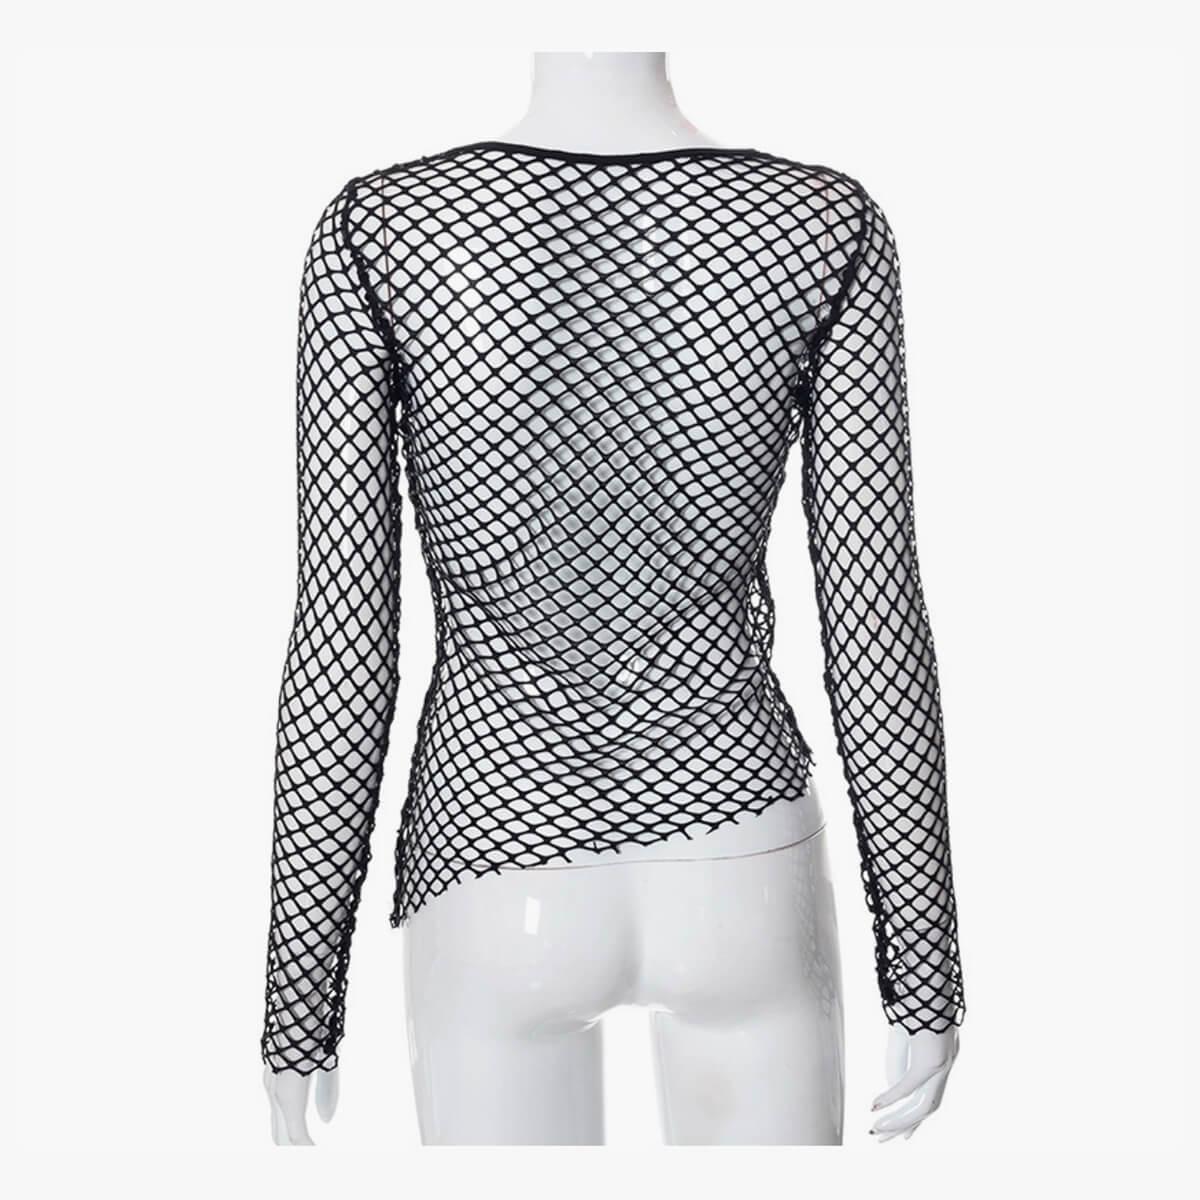 Black Grunge Aesthetic Fishnet Long Sleeve Top - Aesthetic Clothes Shop